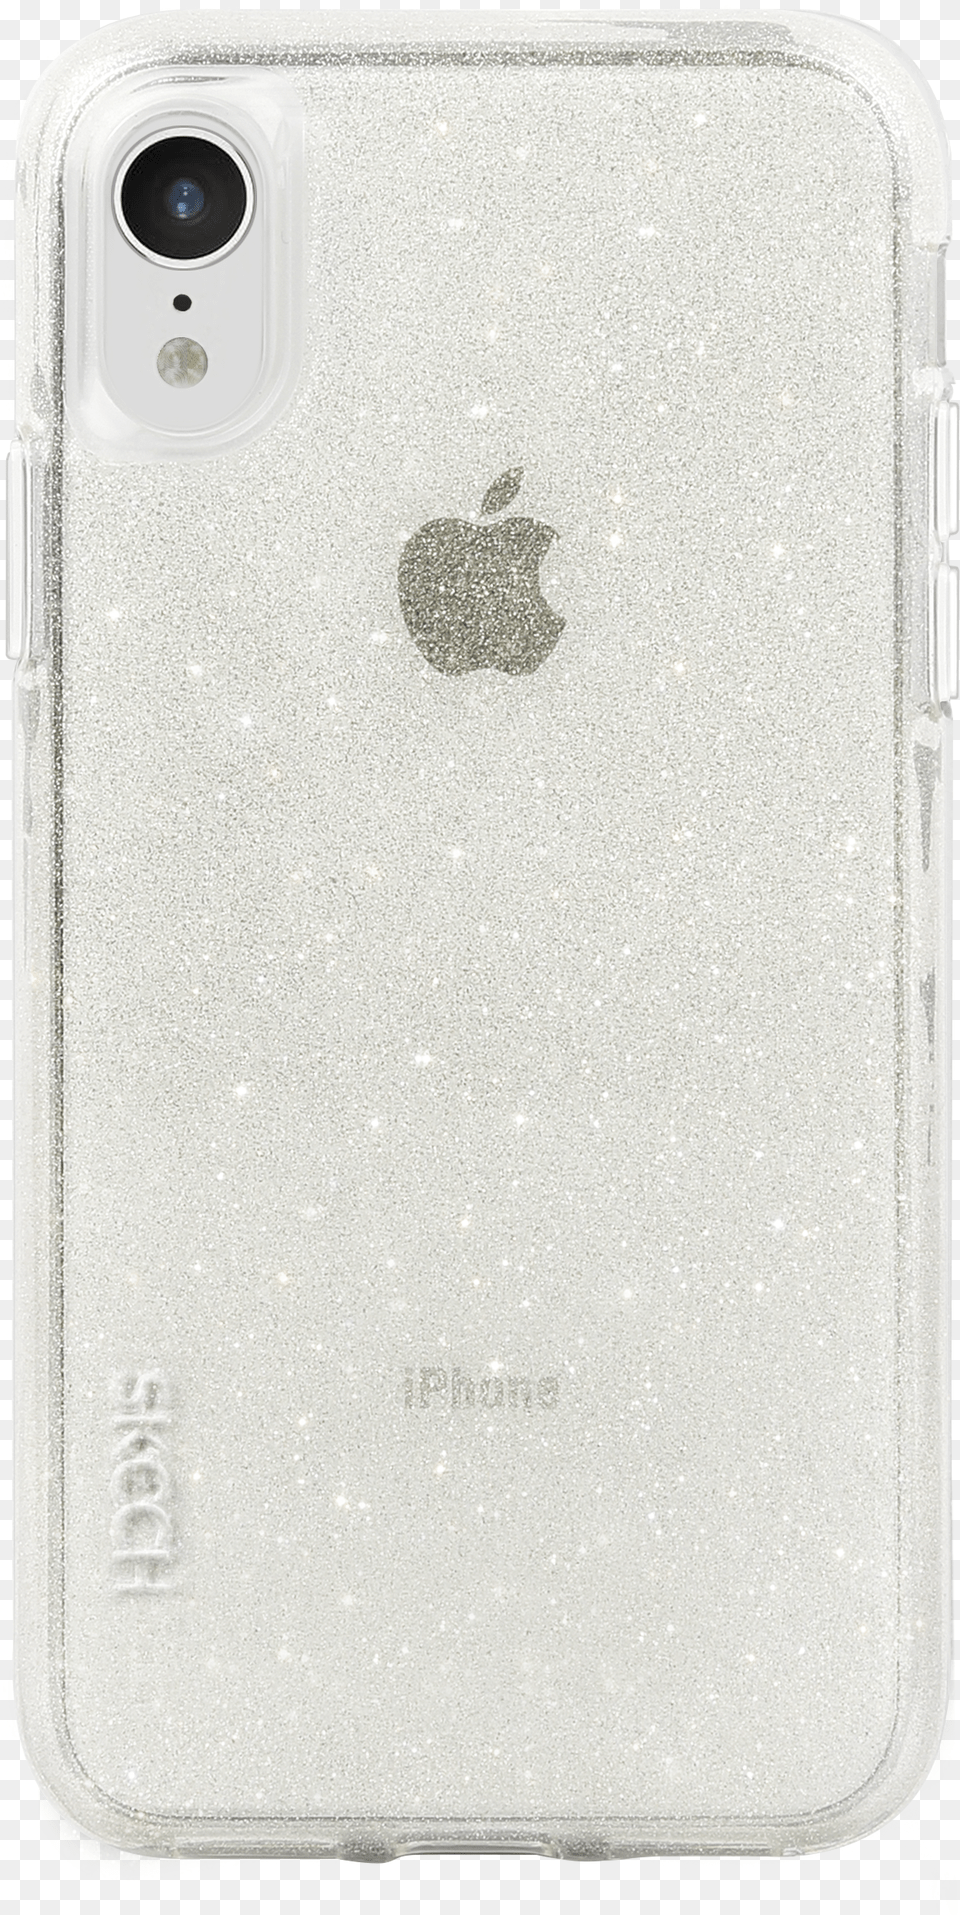 Iphone Png